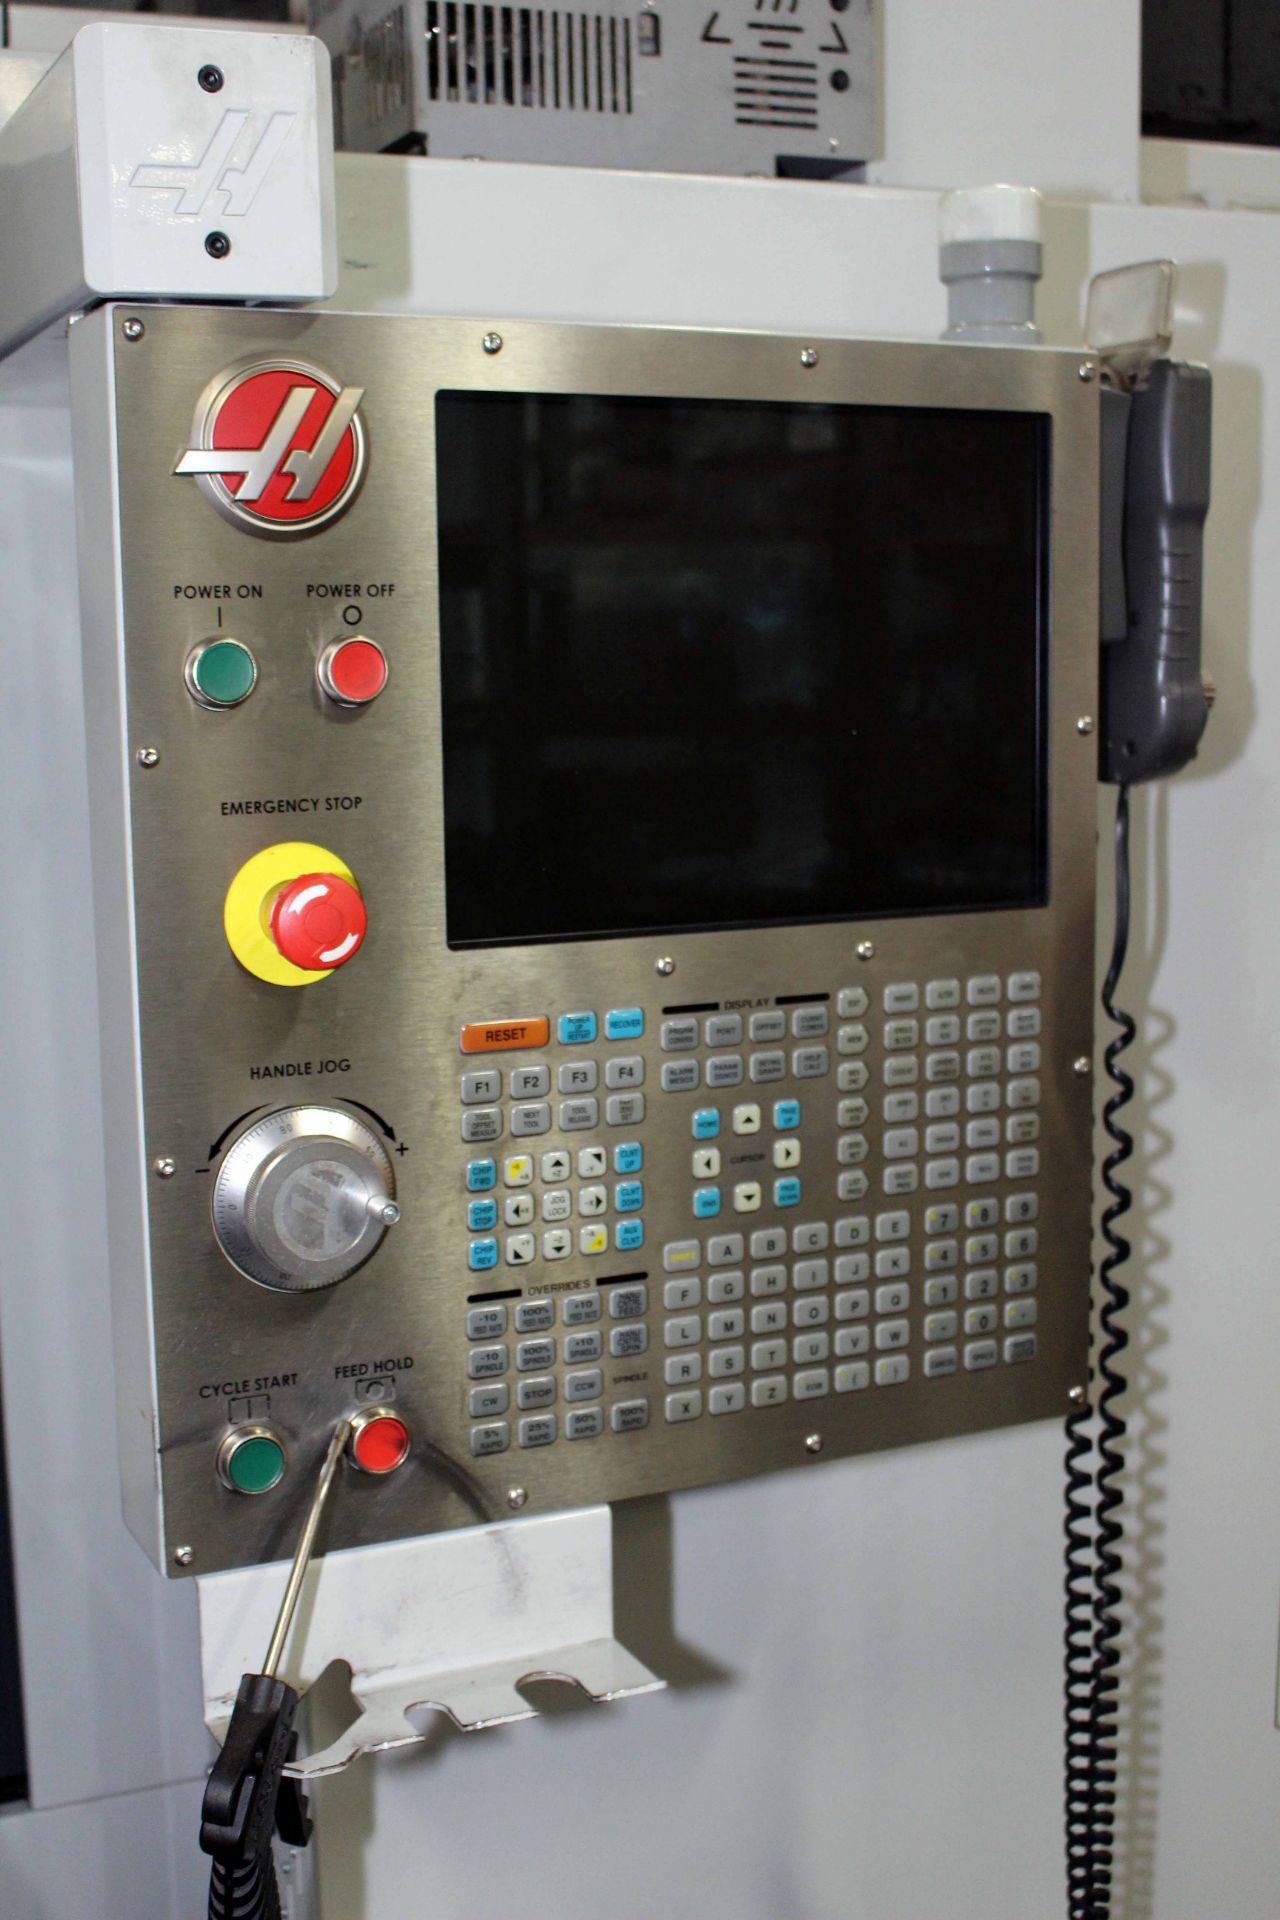 CNC 4-AXIS HORIZONTAL MACHINING CENTER, HAAS MDL. ES-5-4AX, new 11/2012, Haas CNC control, 20" x 52" - Image 2 of 4